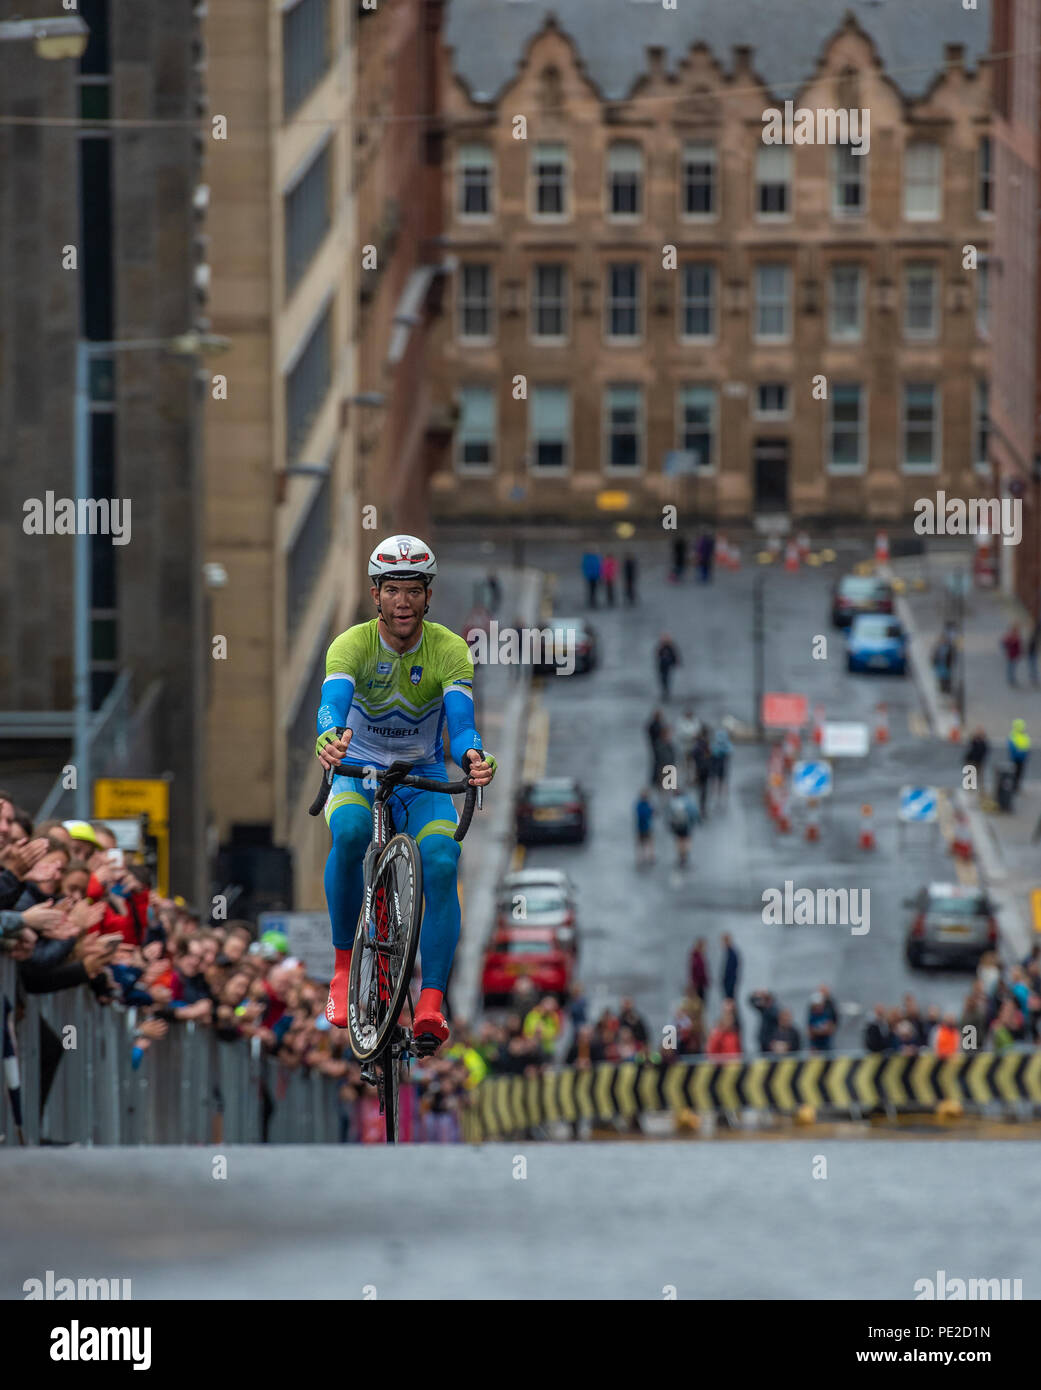 Glasgow, Scotland. 12th Aug, 2018. A Slovenian competitor with front wheel in the air at the European Championship Mens Cycling Road Race, at the top of a hill climb in Glasgow, Scotland. Credit George Robertson/Alamy Live News Stock Photo